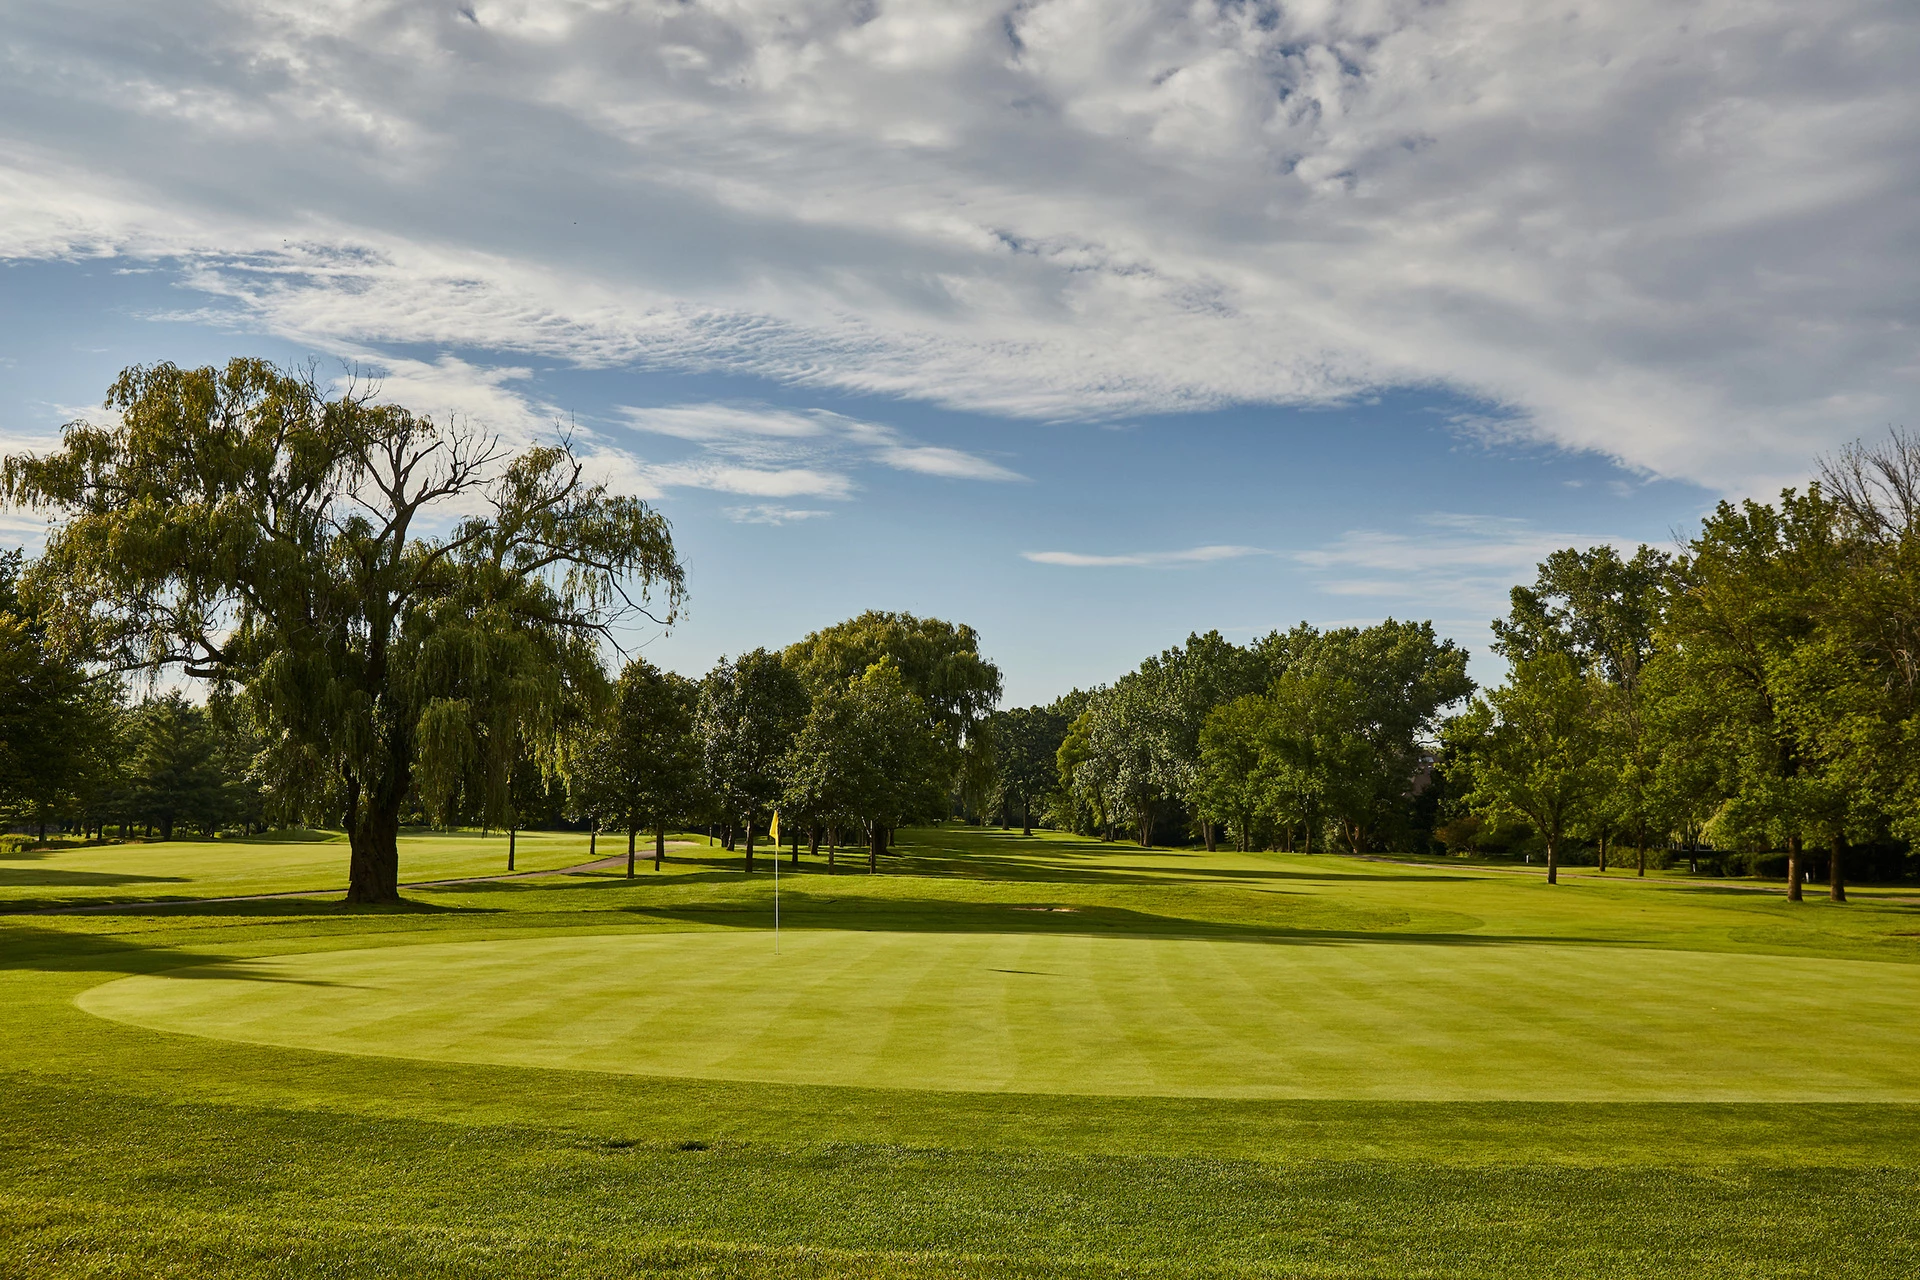 Ravinia Green Country Club - Golf Course Hole 16